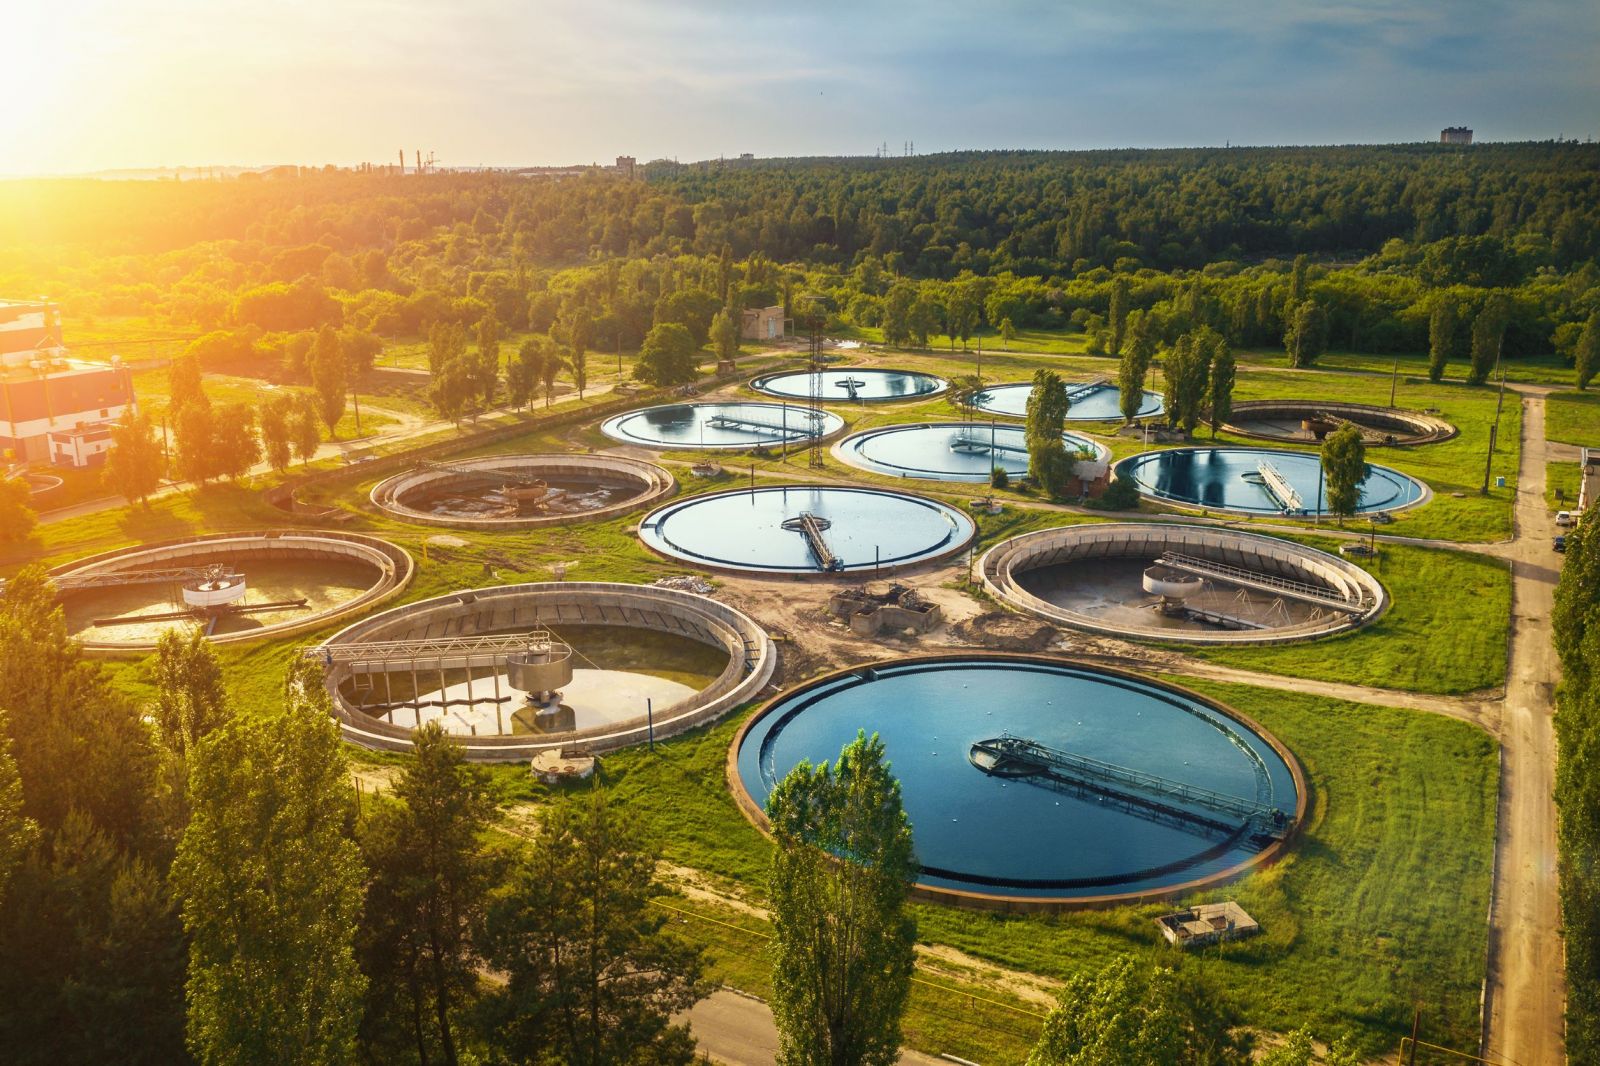 Financial sustainability of wastewater management in the Danube region